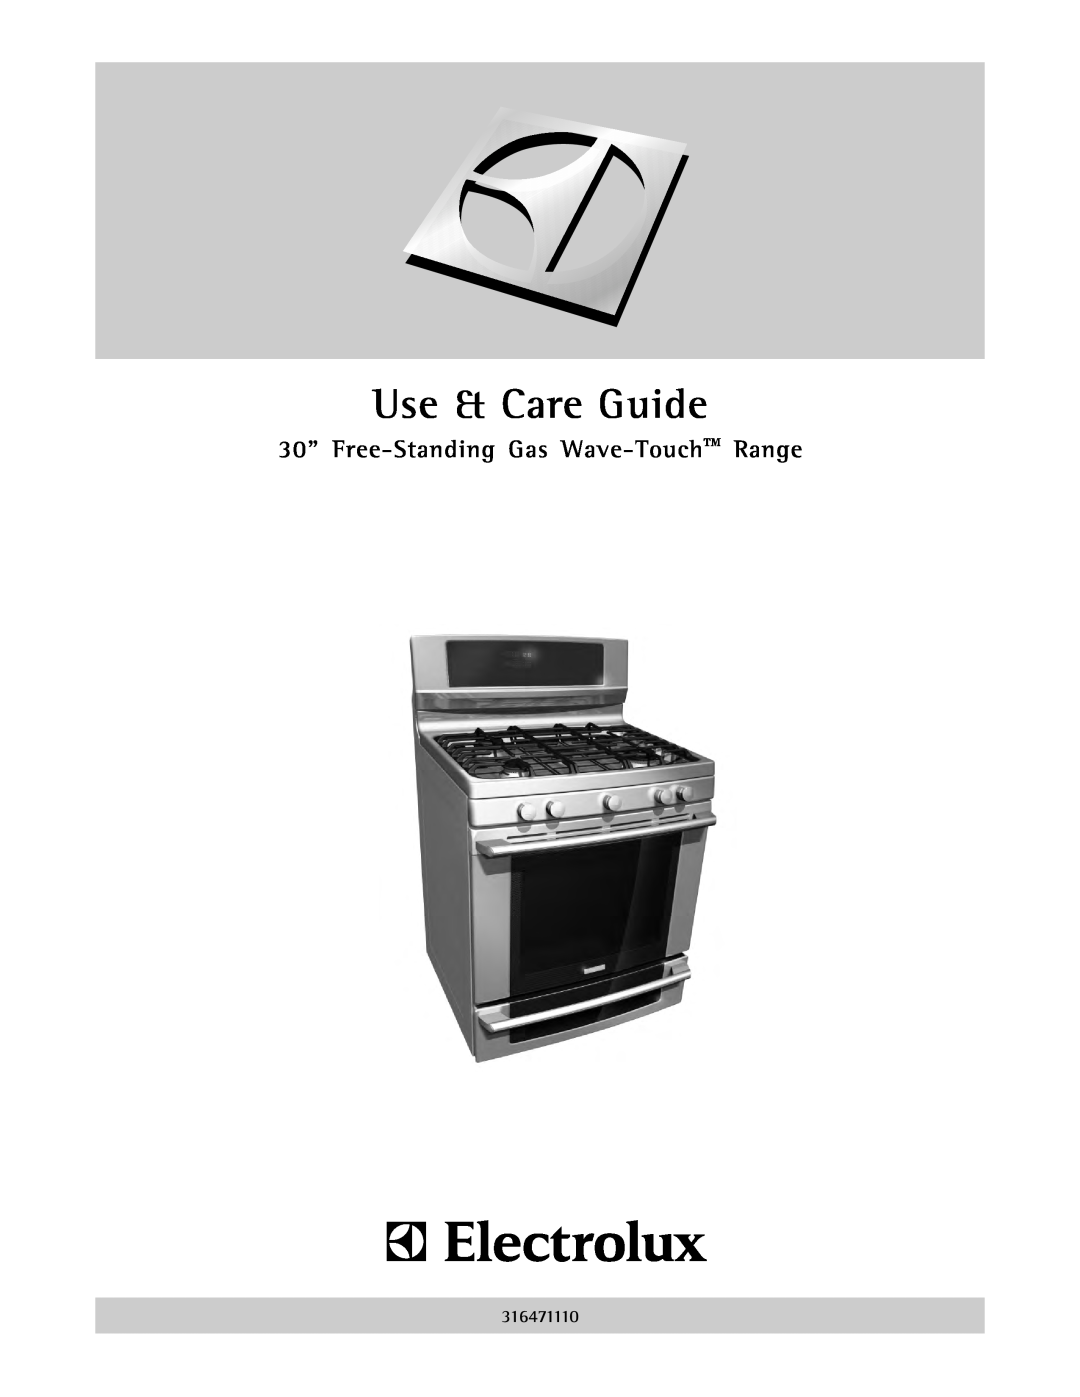 Electrolux 316471110 manual Use & Care Guide, 30” Free-Standing Gas Wave-Touch Range 